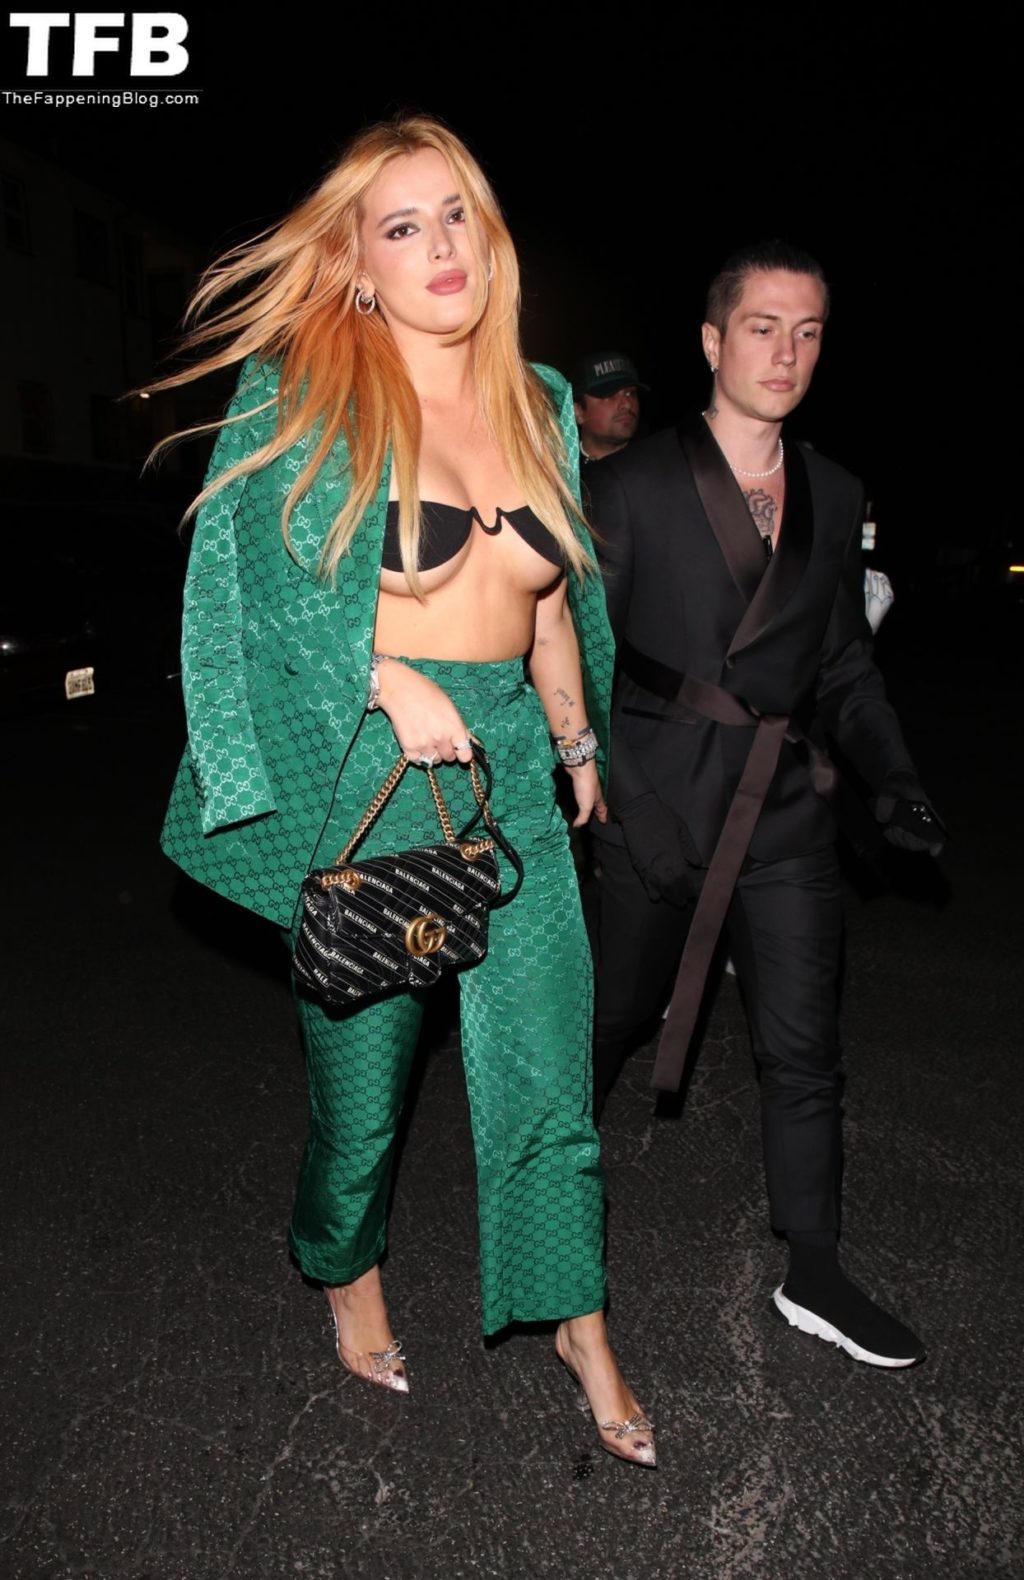 Bella Thorne Sexy The Fappening Blog 5 1024x1580 - Bella Thorne Rocks Gucci at Mike Dean and Jeff Bhasker’s Pre Grammy Party (7 Photos)